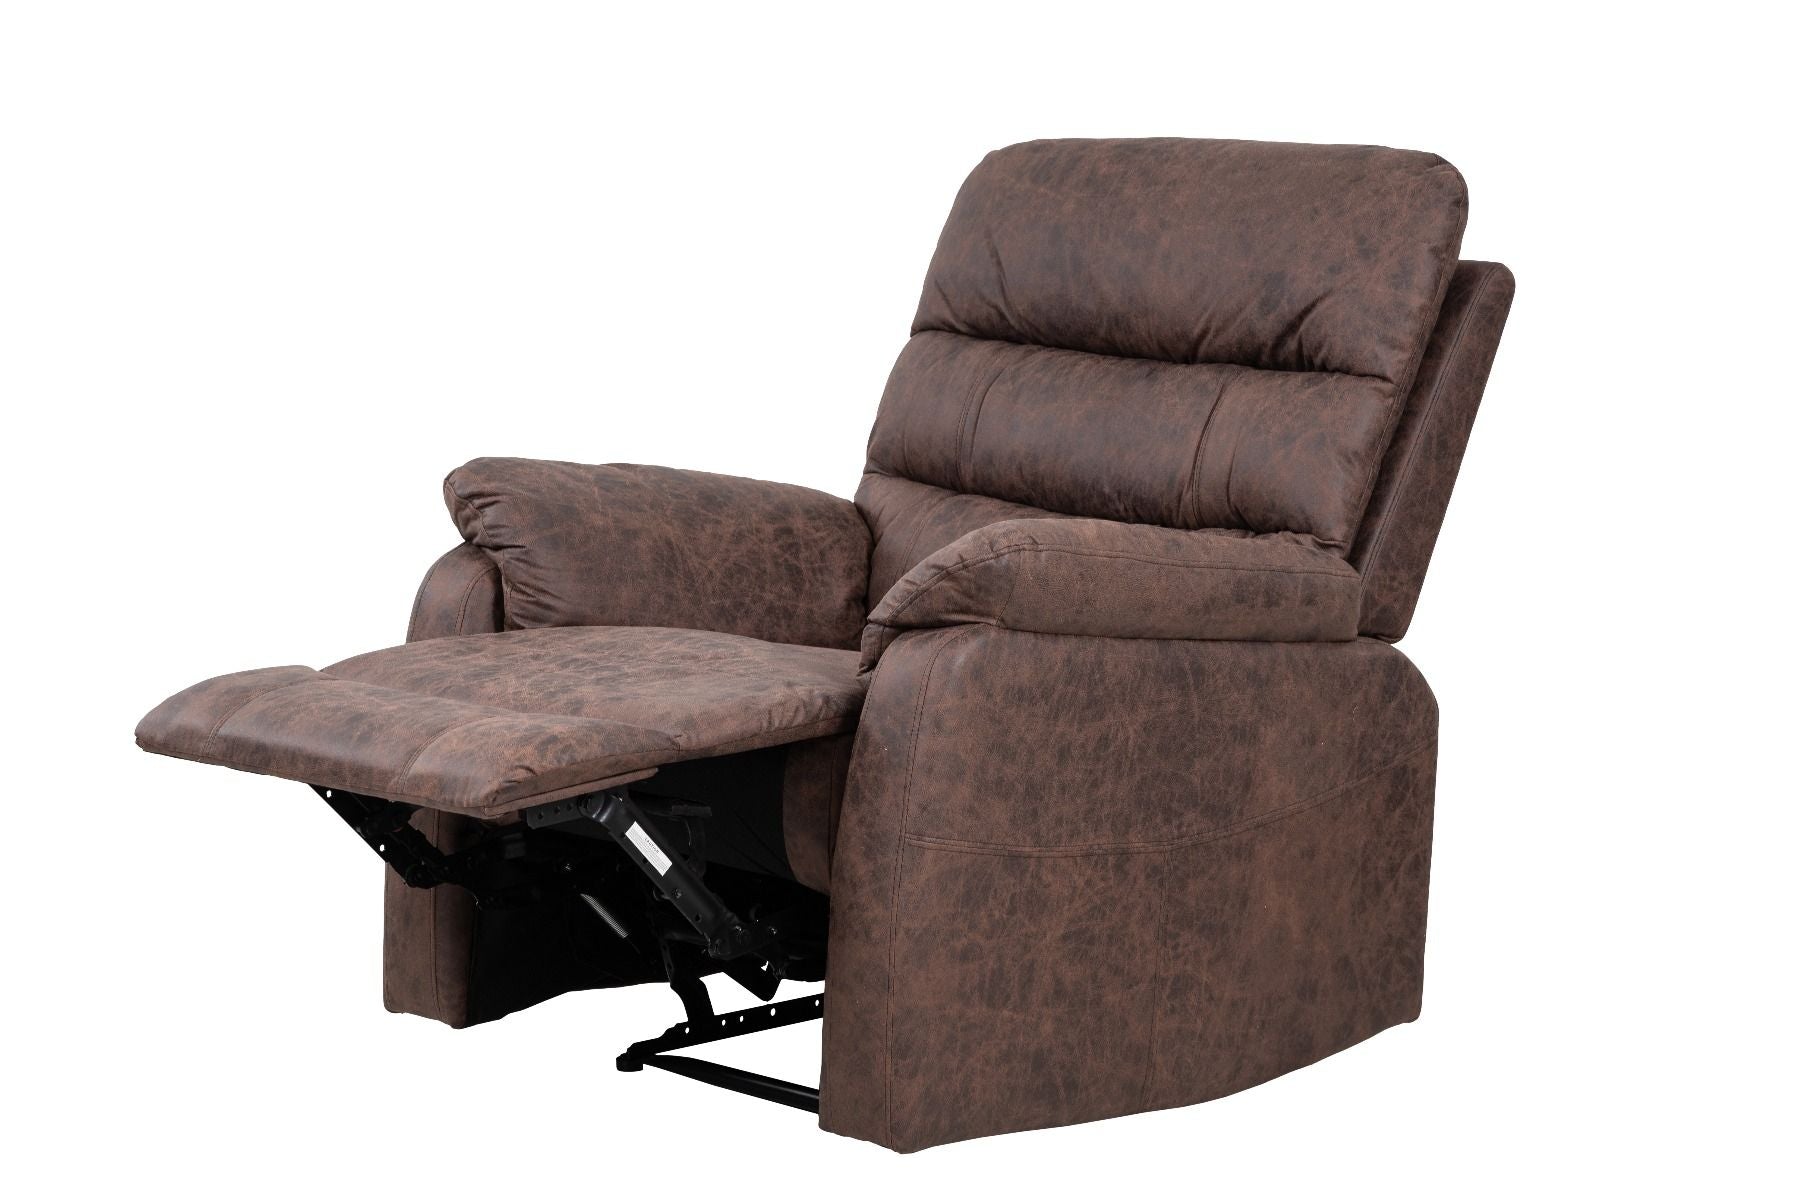 Taylor Recliner Chair-Leather Air-Antique Brown Rub Off